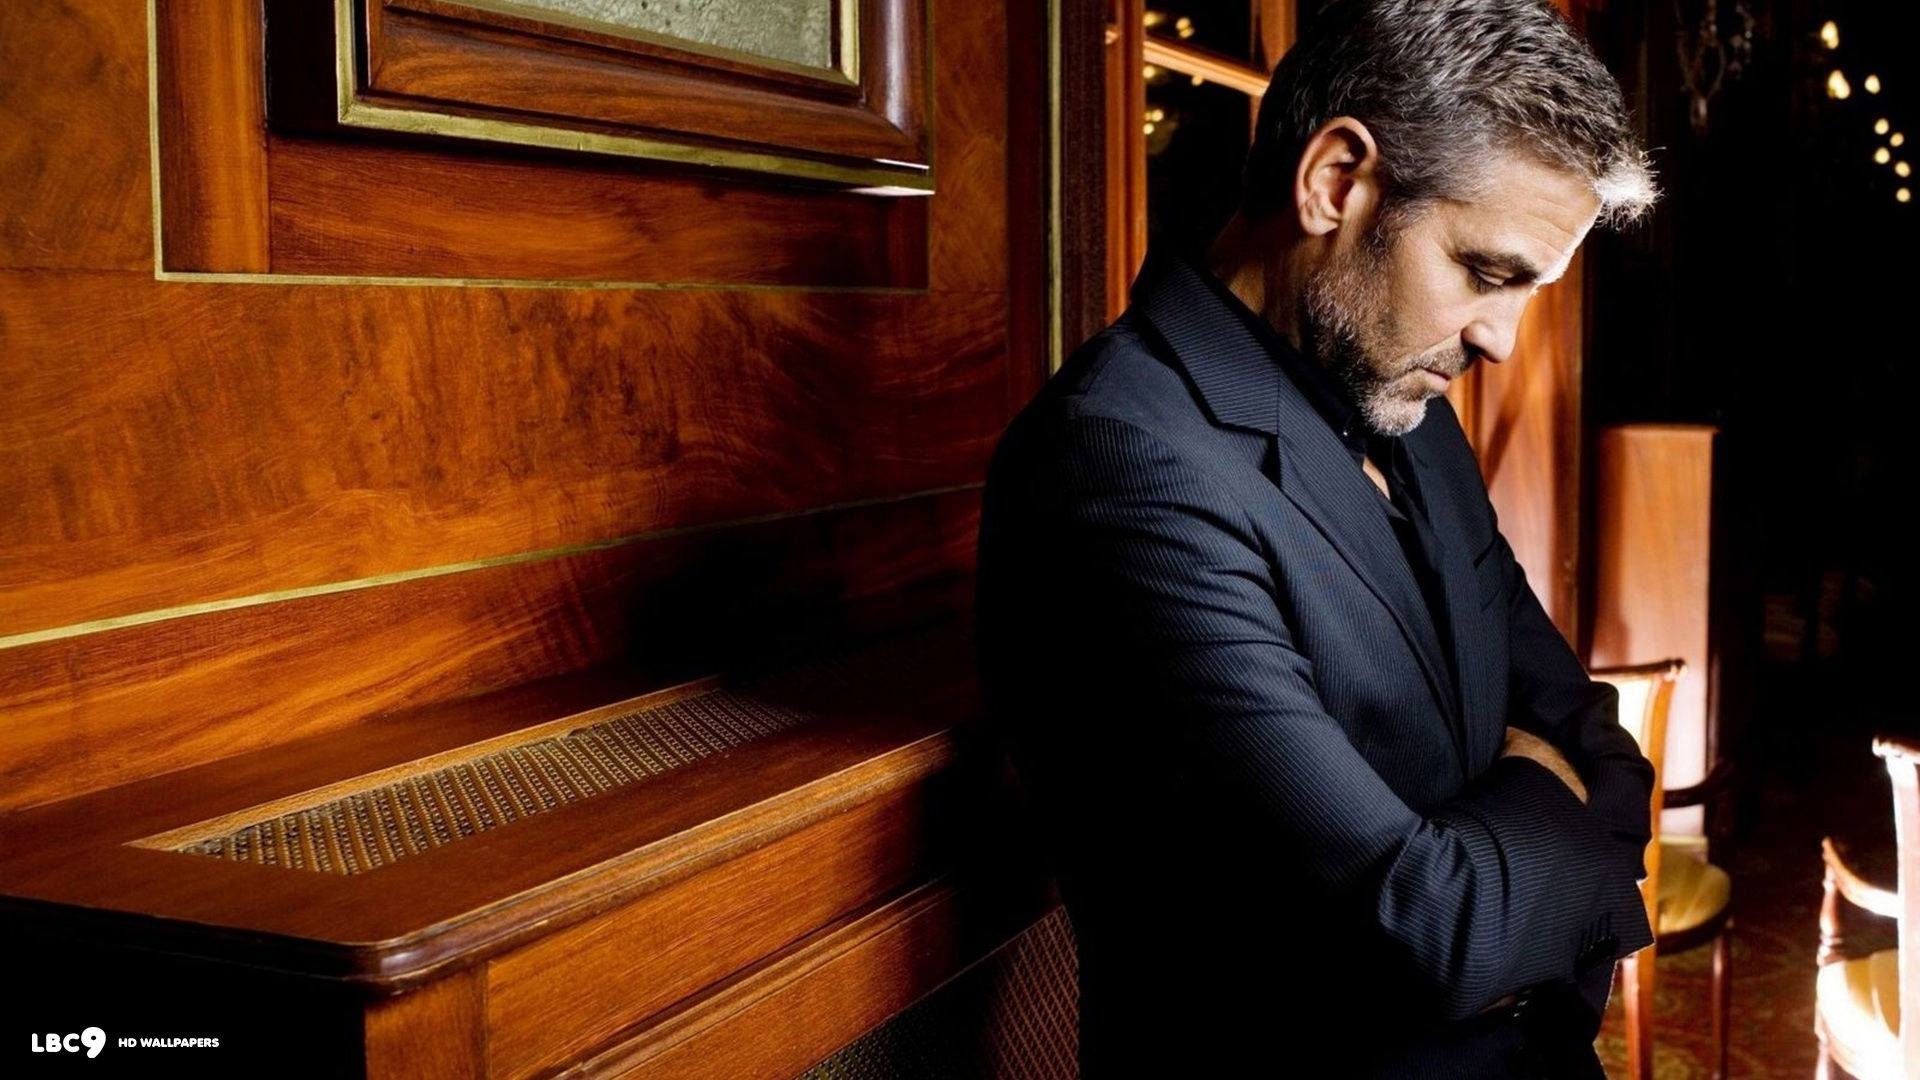 George Clooney, Multi-million-dollar offer, Business decision, Worth of time, 1920x1080 Full HD Desktop